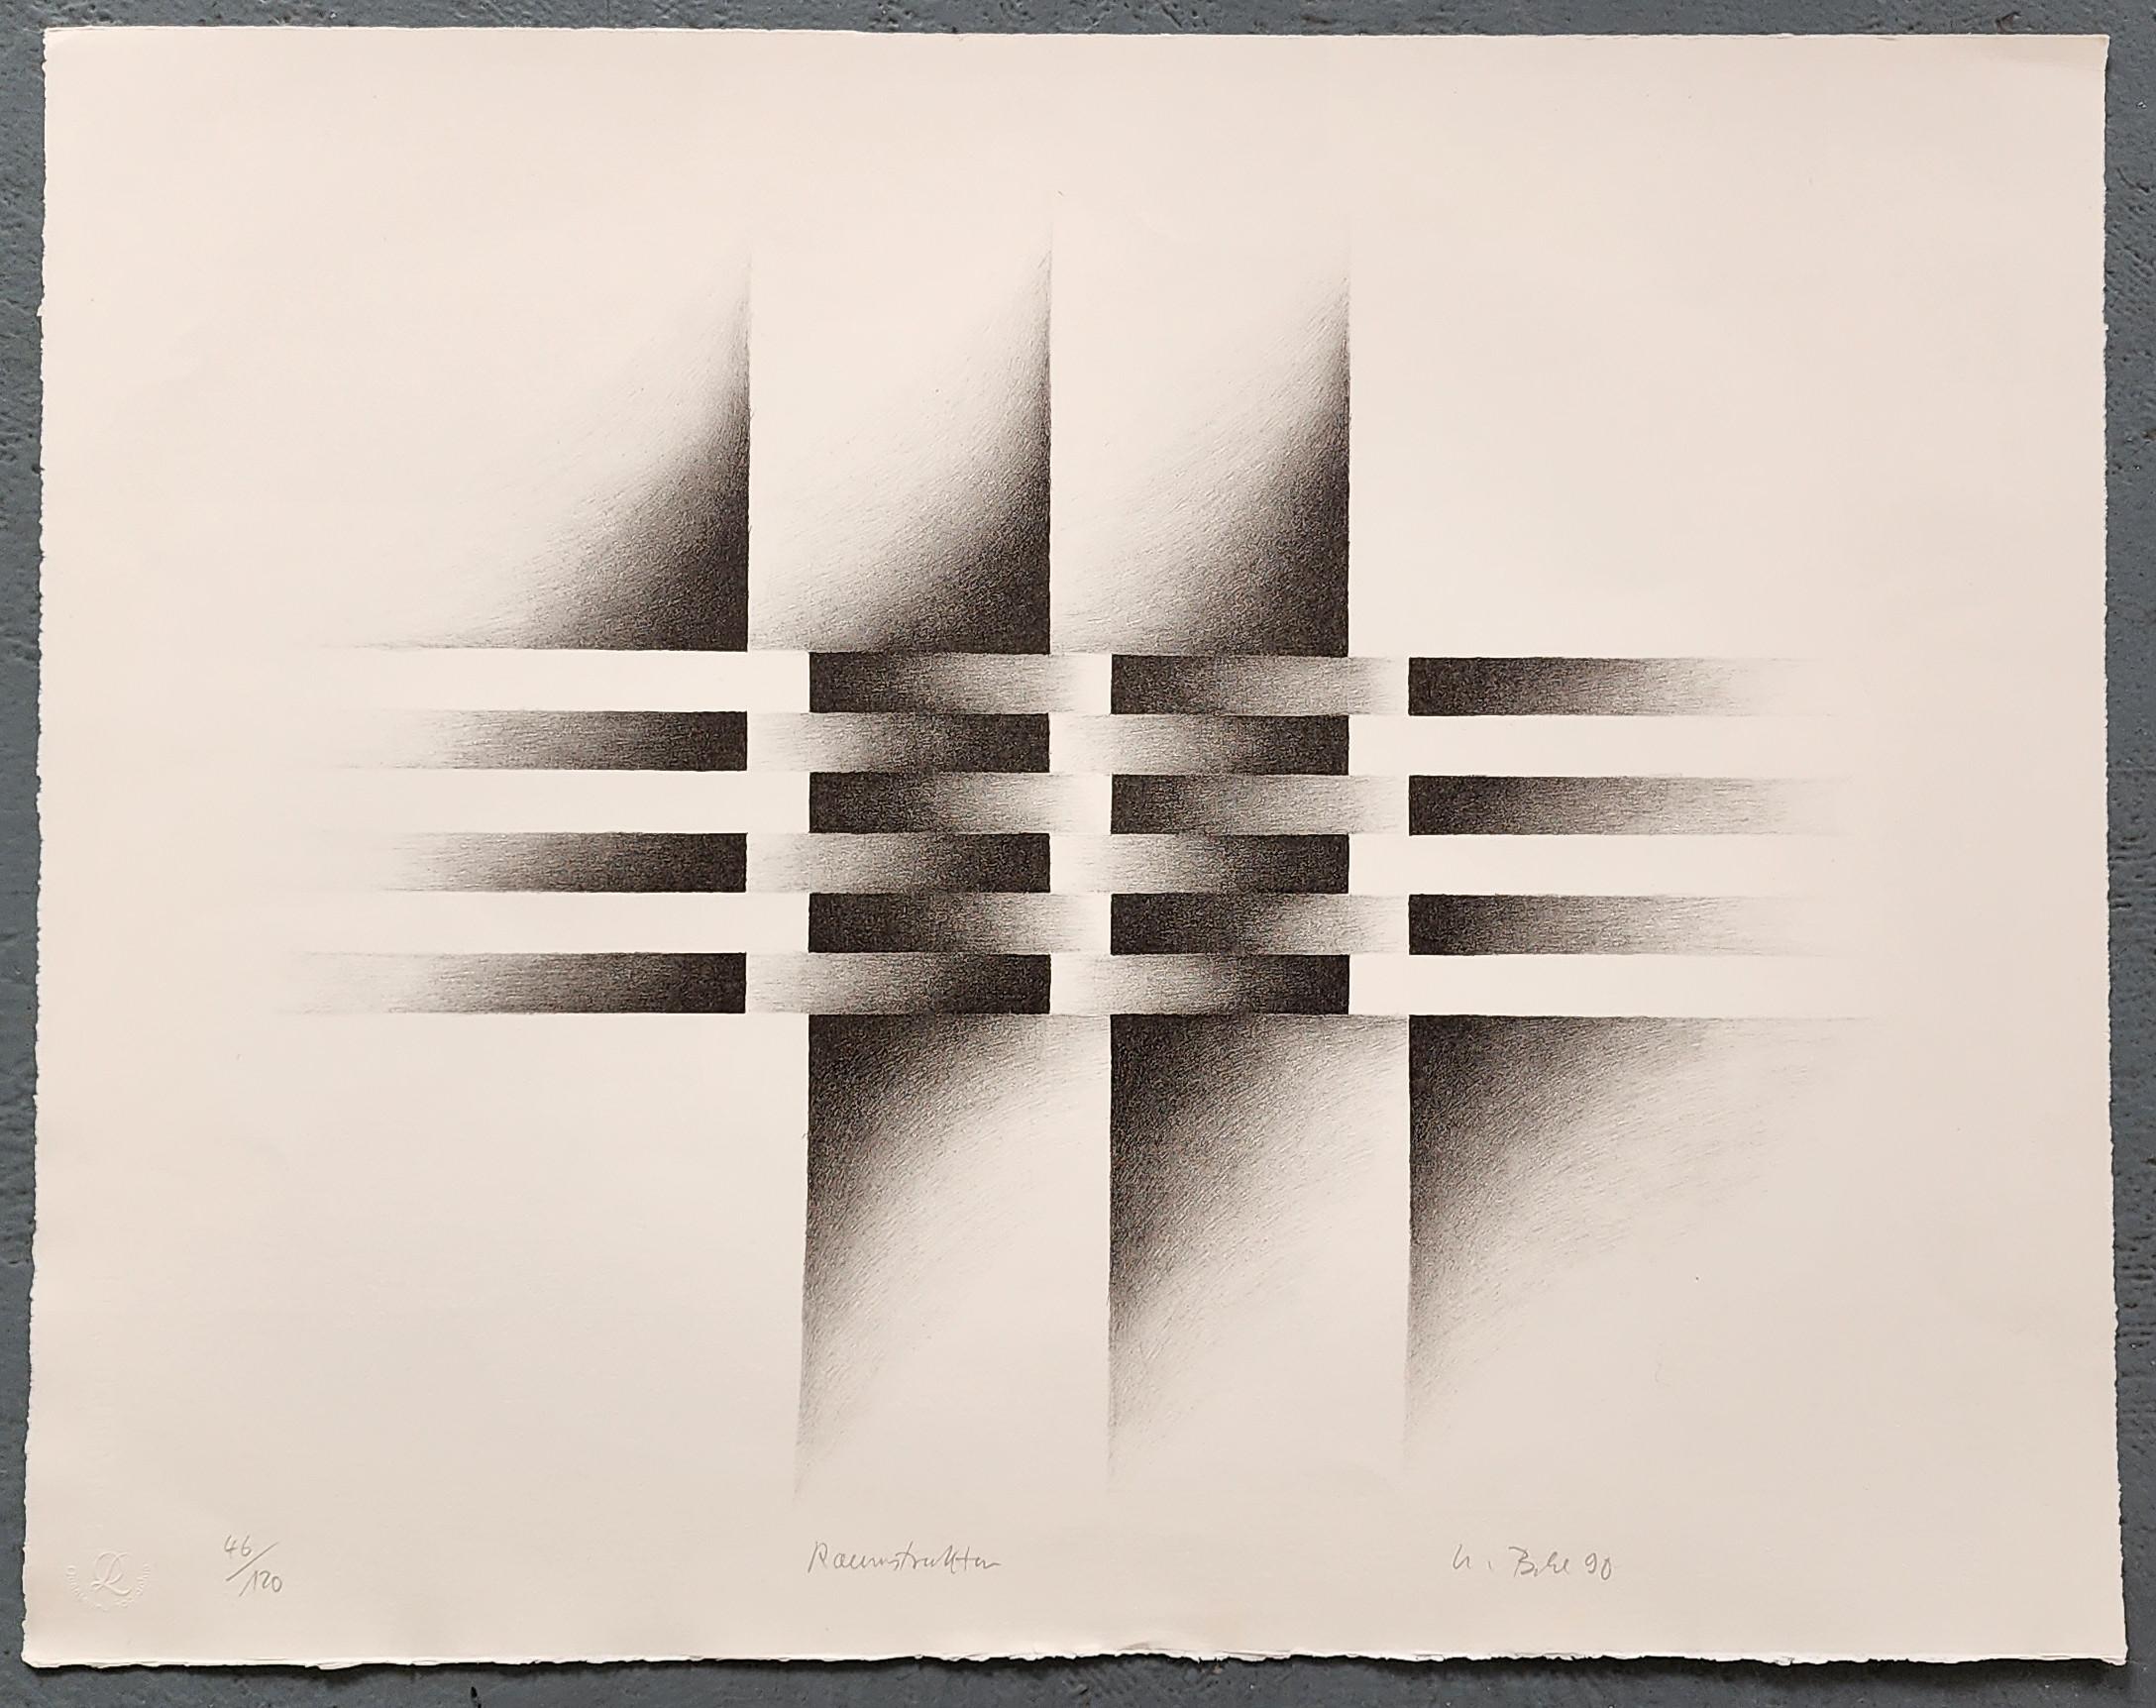 Ulrich Behl Abstract Print - Spatial Structure (Raumstruktur)